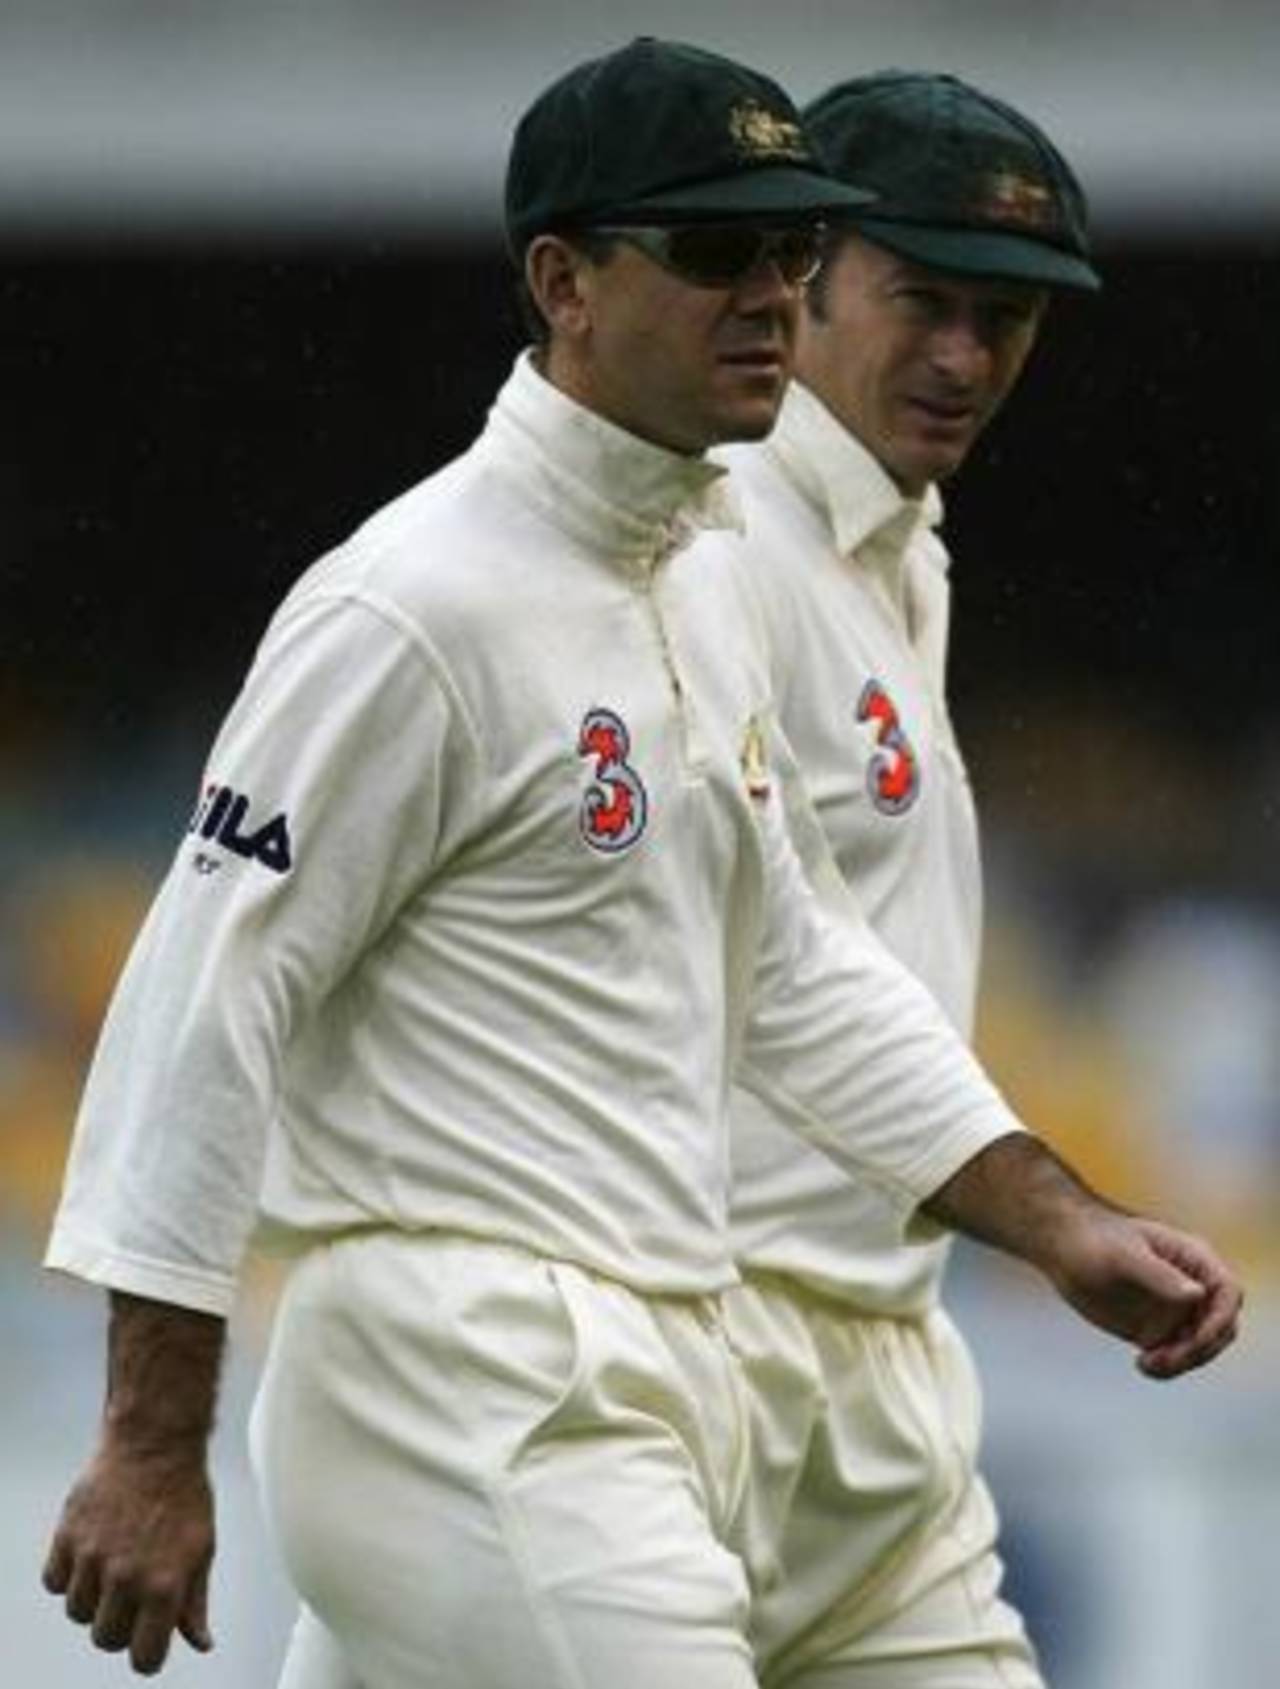 Two Australian captains - Ricky Ponting and Steve Waugh leave the field together, Australia v India, 1st Test, Brisbane, 3rd day, December 6, 2003